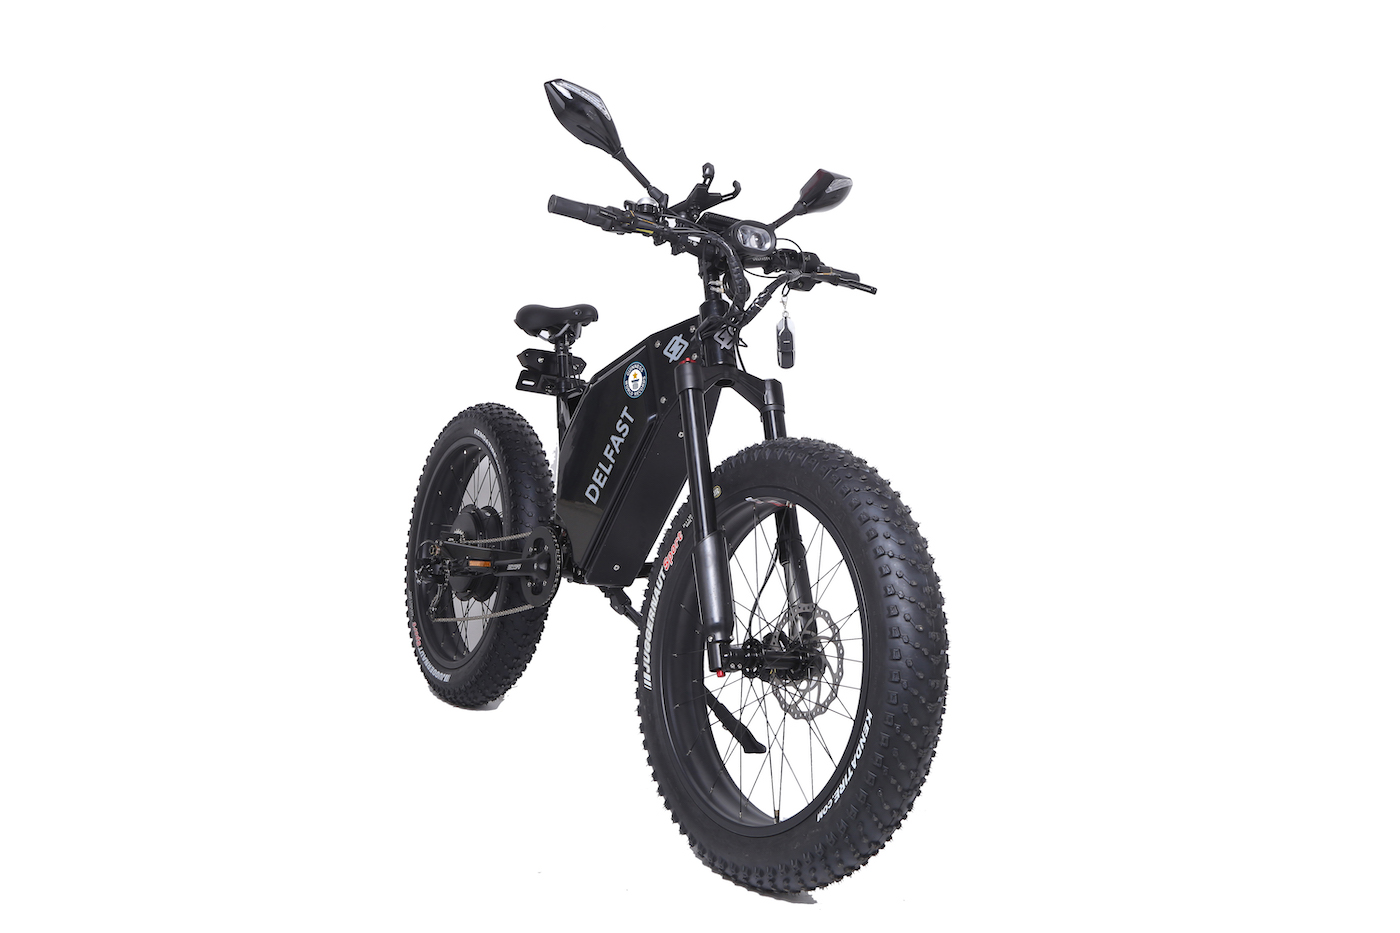 electric mountain bikes on trails